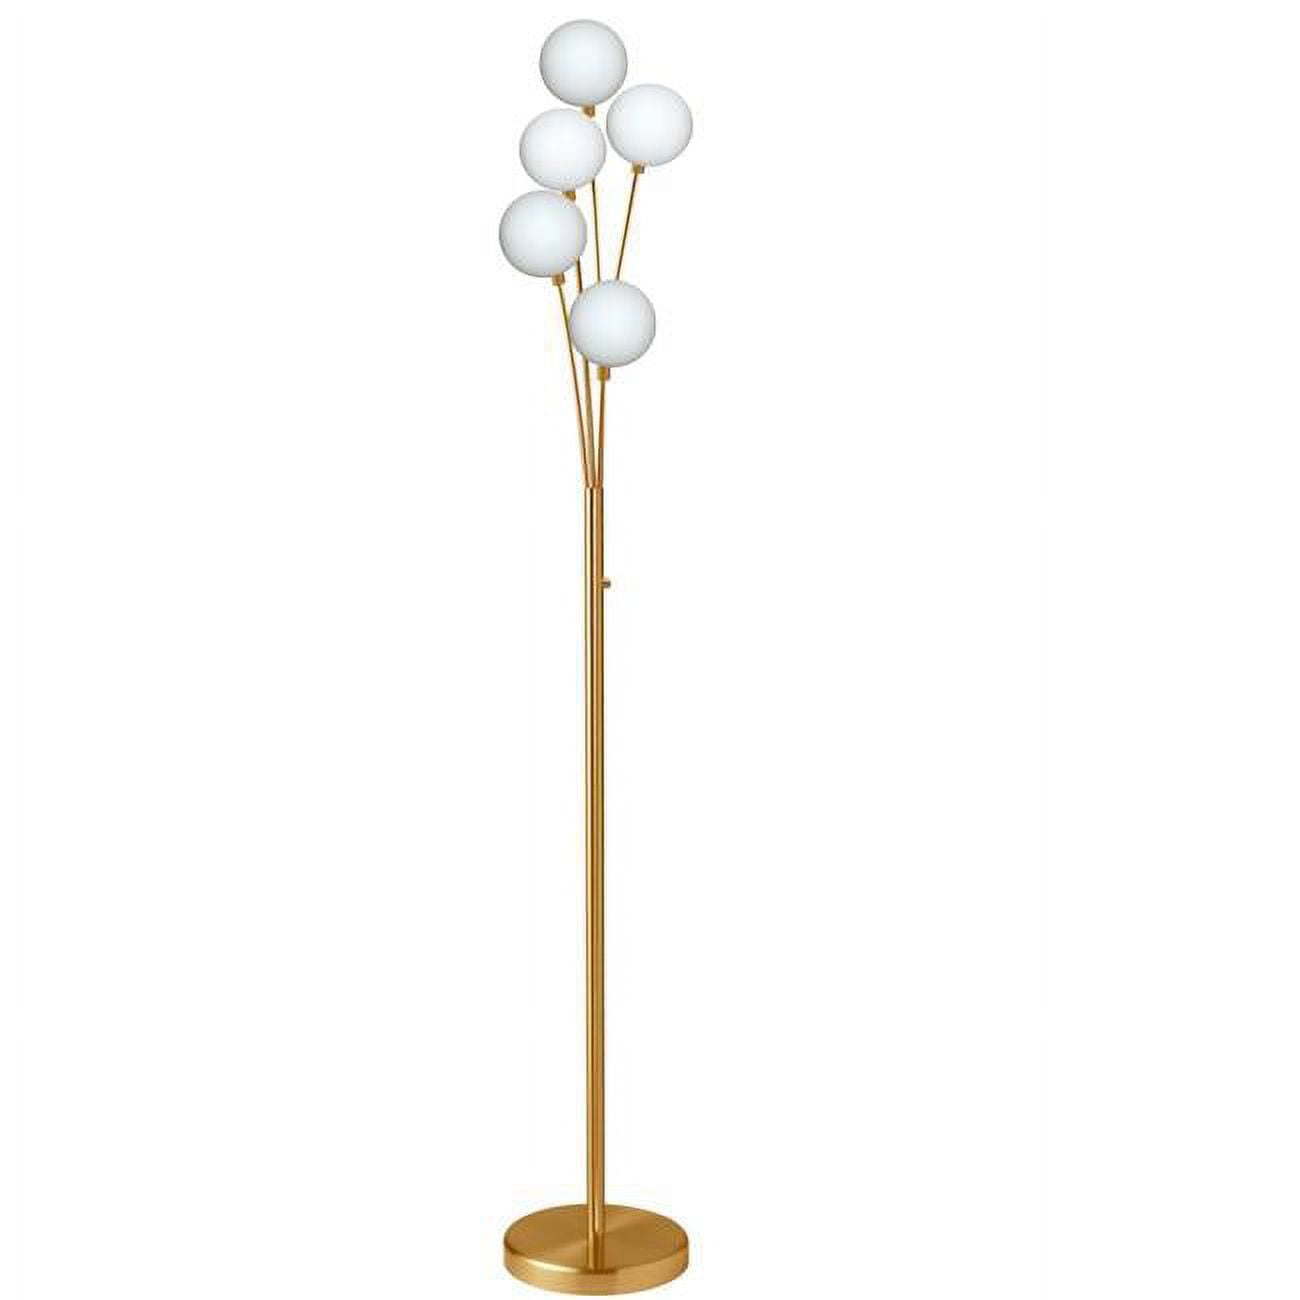 Picture of Dainolite 306F-AGB 5 Light Incandescent Floor Lamp, Aged Brass with White Glass